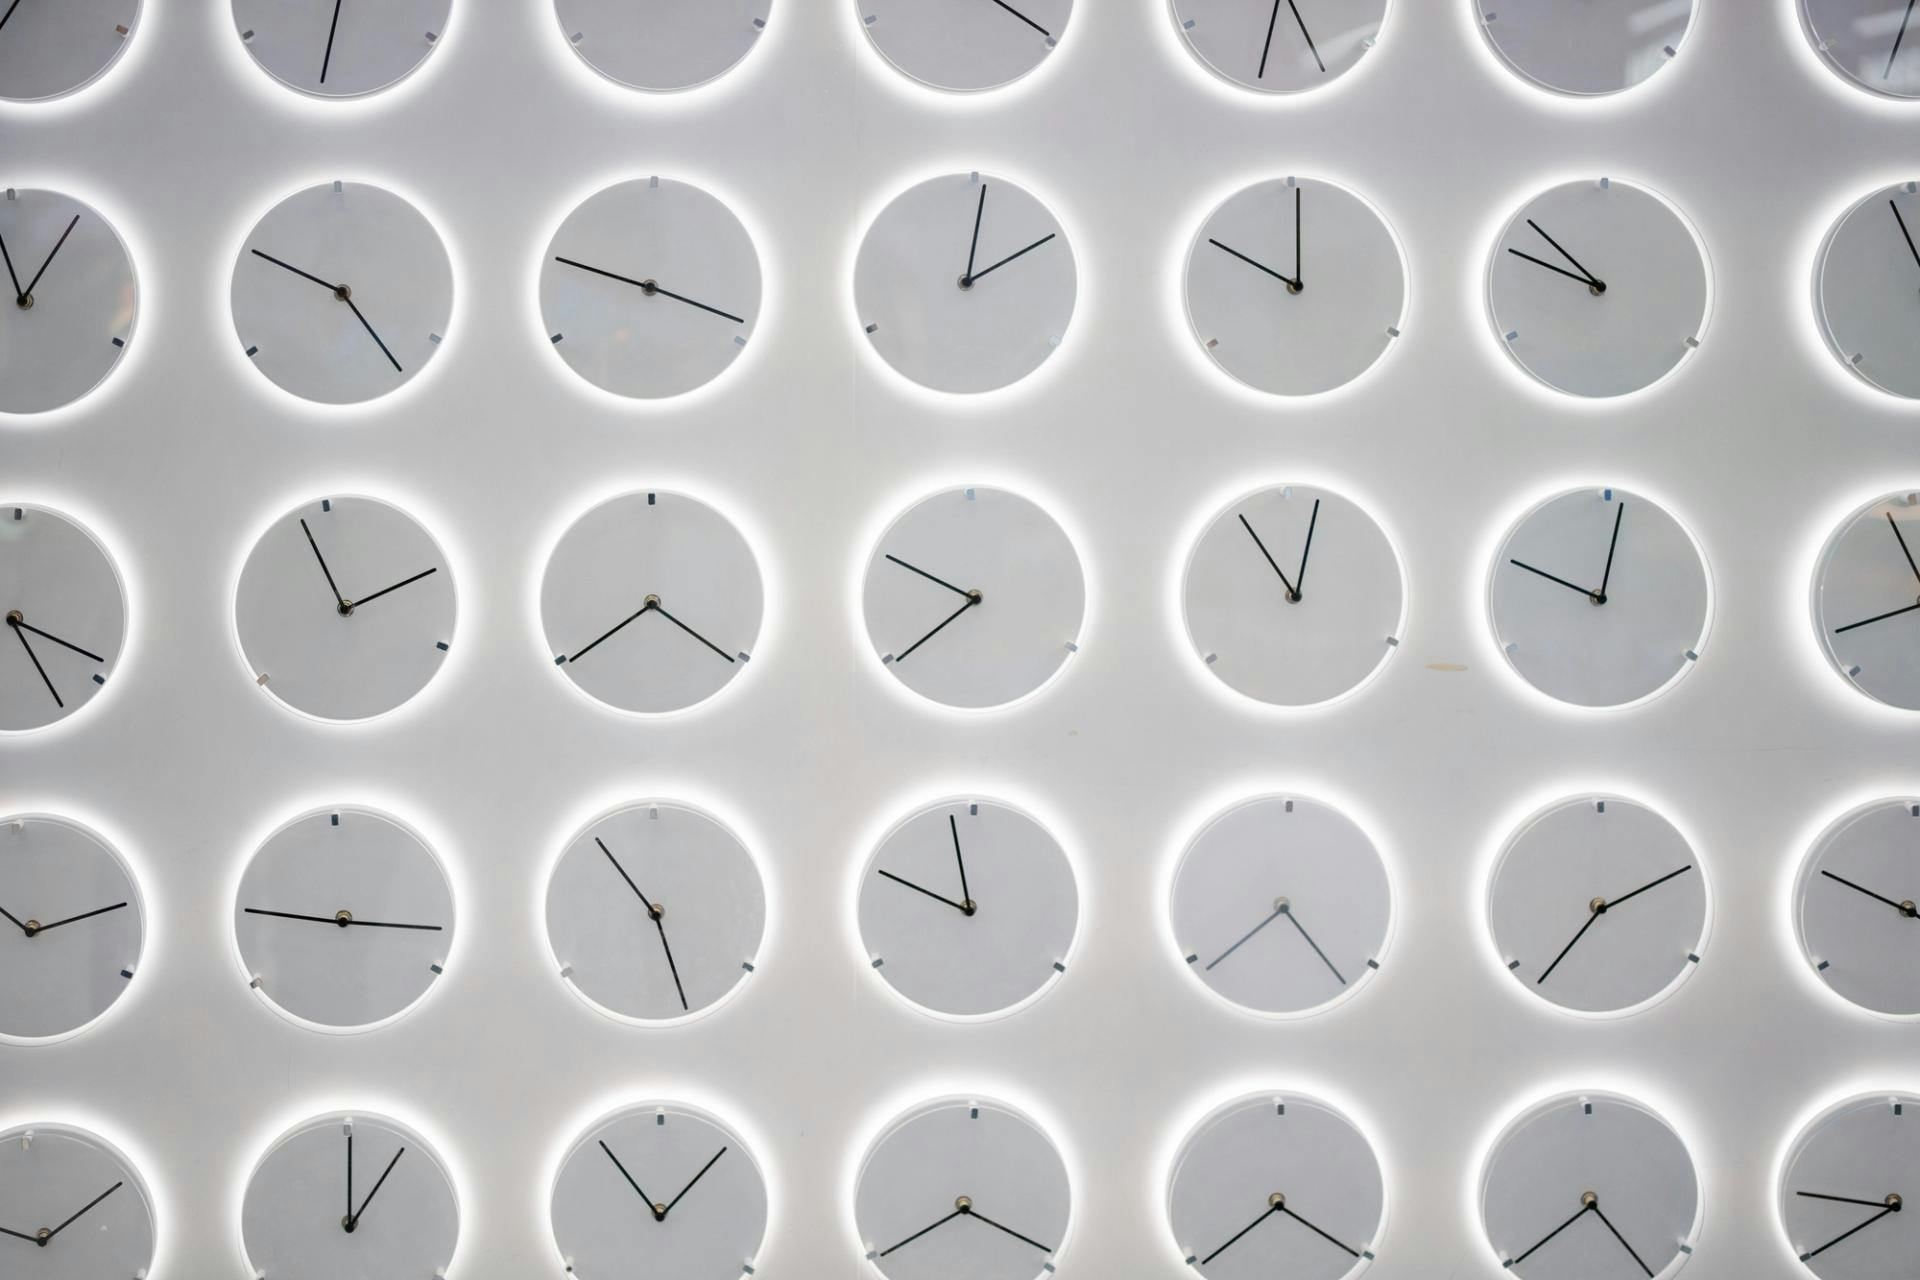 Clocks showing difference times with a white background in structured rows and columns with a white glow around each clock.